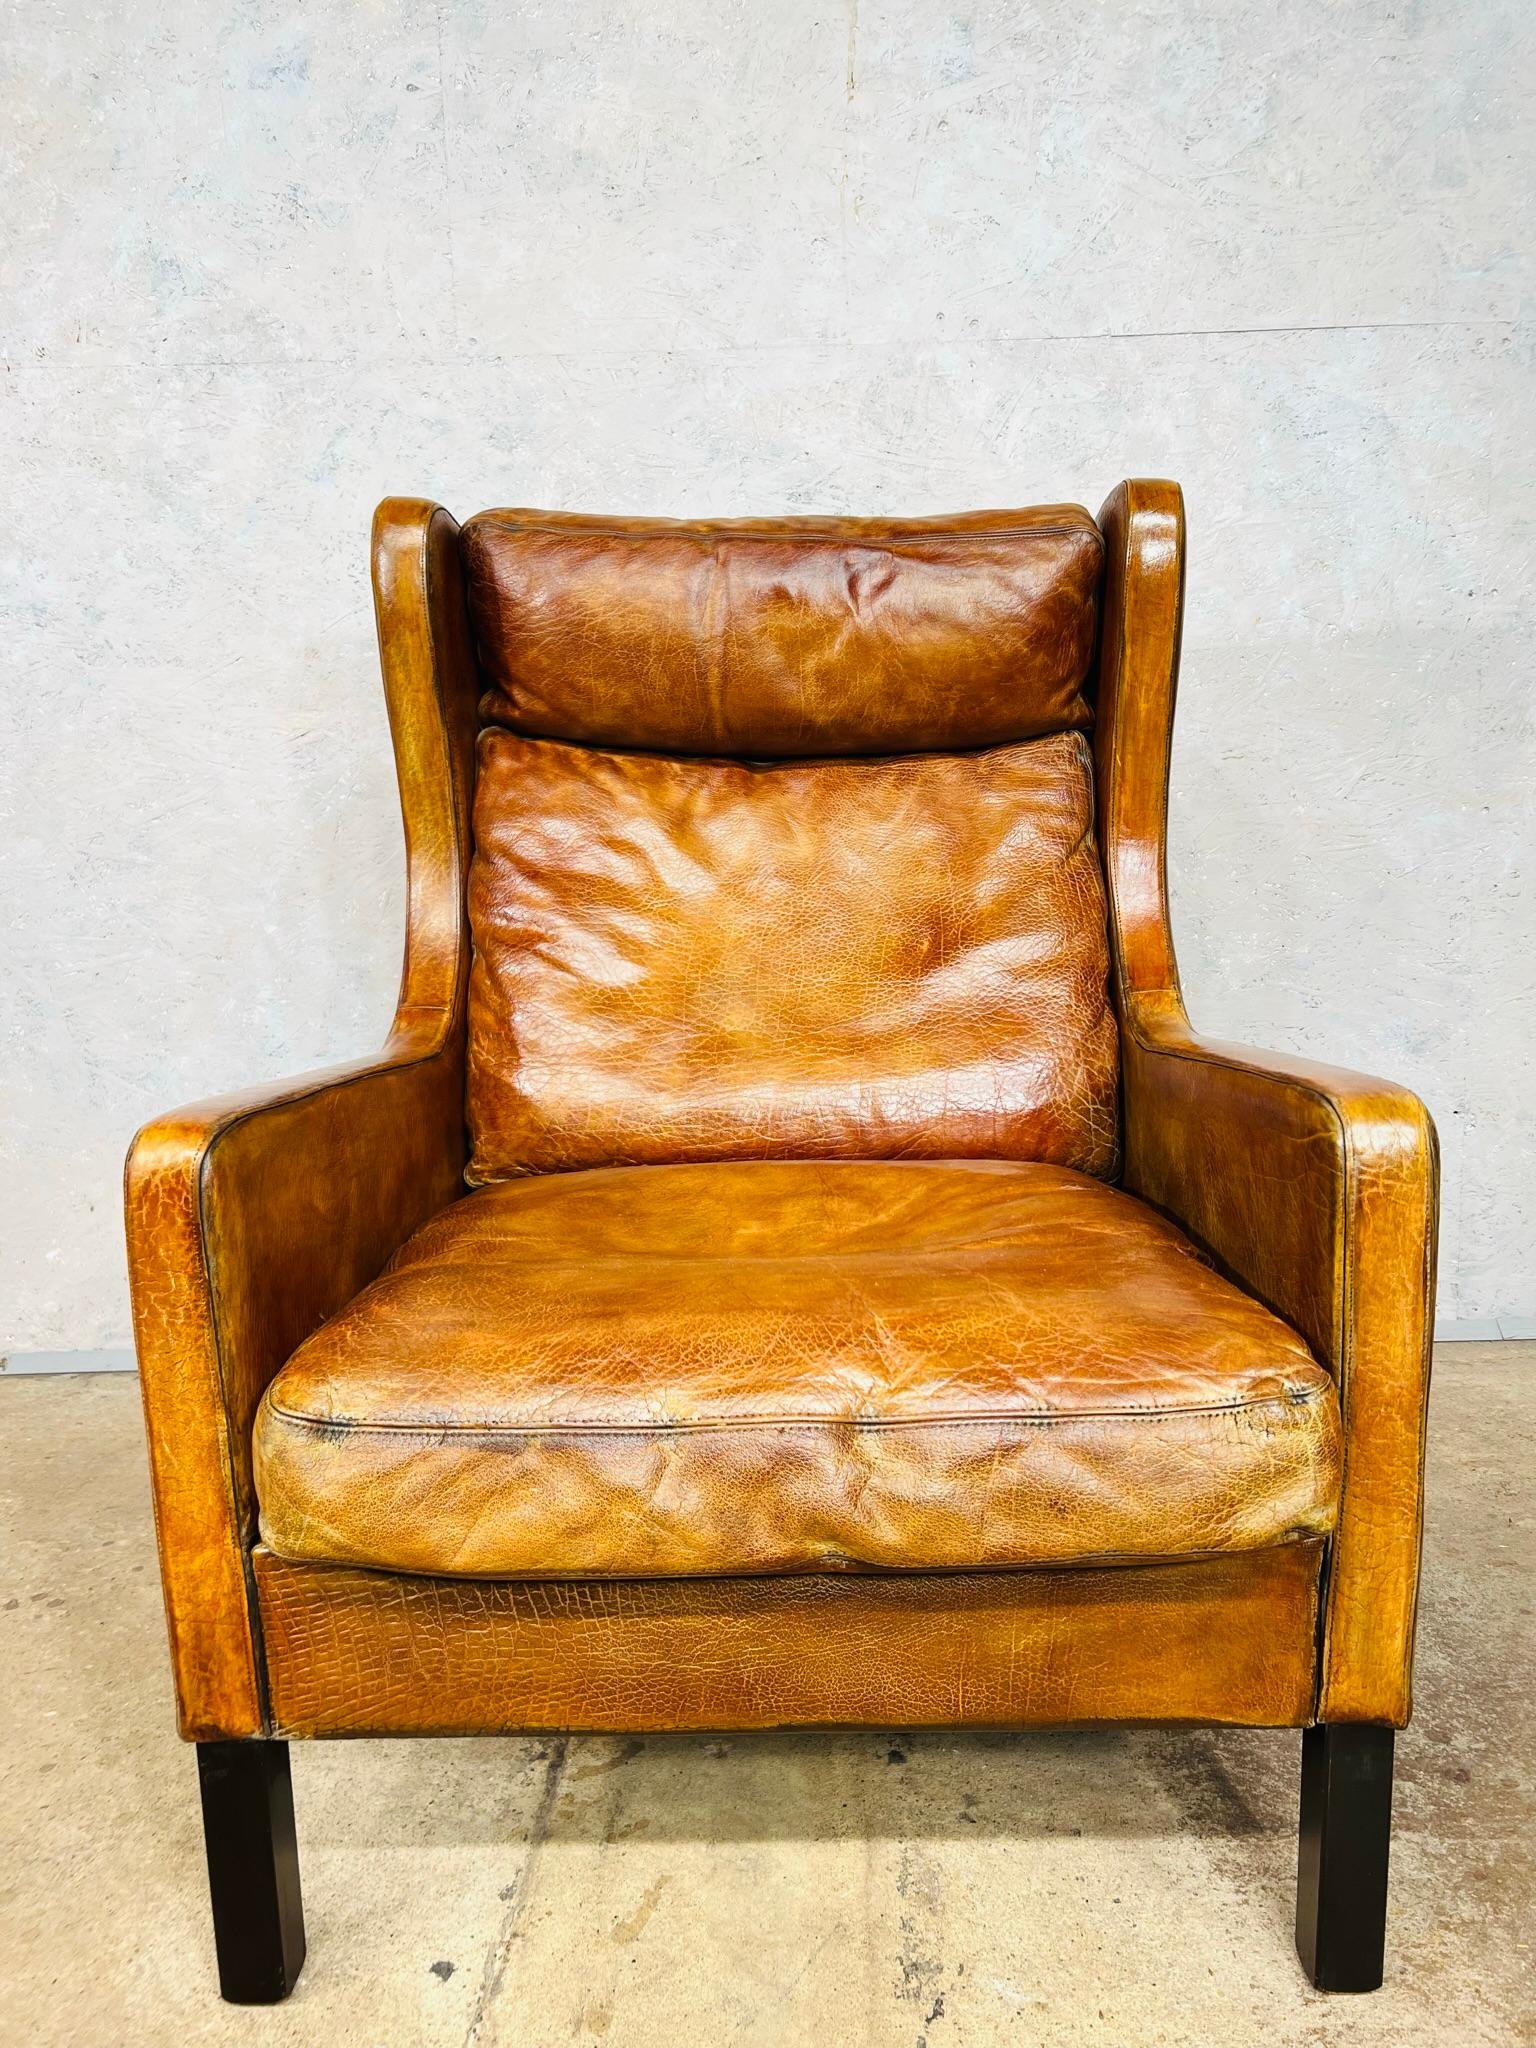 A Stunning Vintage Danish 1970s Wingback armchair by designer Thams Kvalitet, great quality chair, with a beautiful shape and proportions. Sits beautifully. In great condition with a great patinated tan colour.

The leather is great quality and